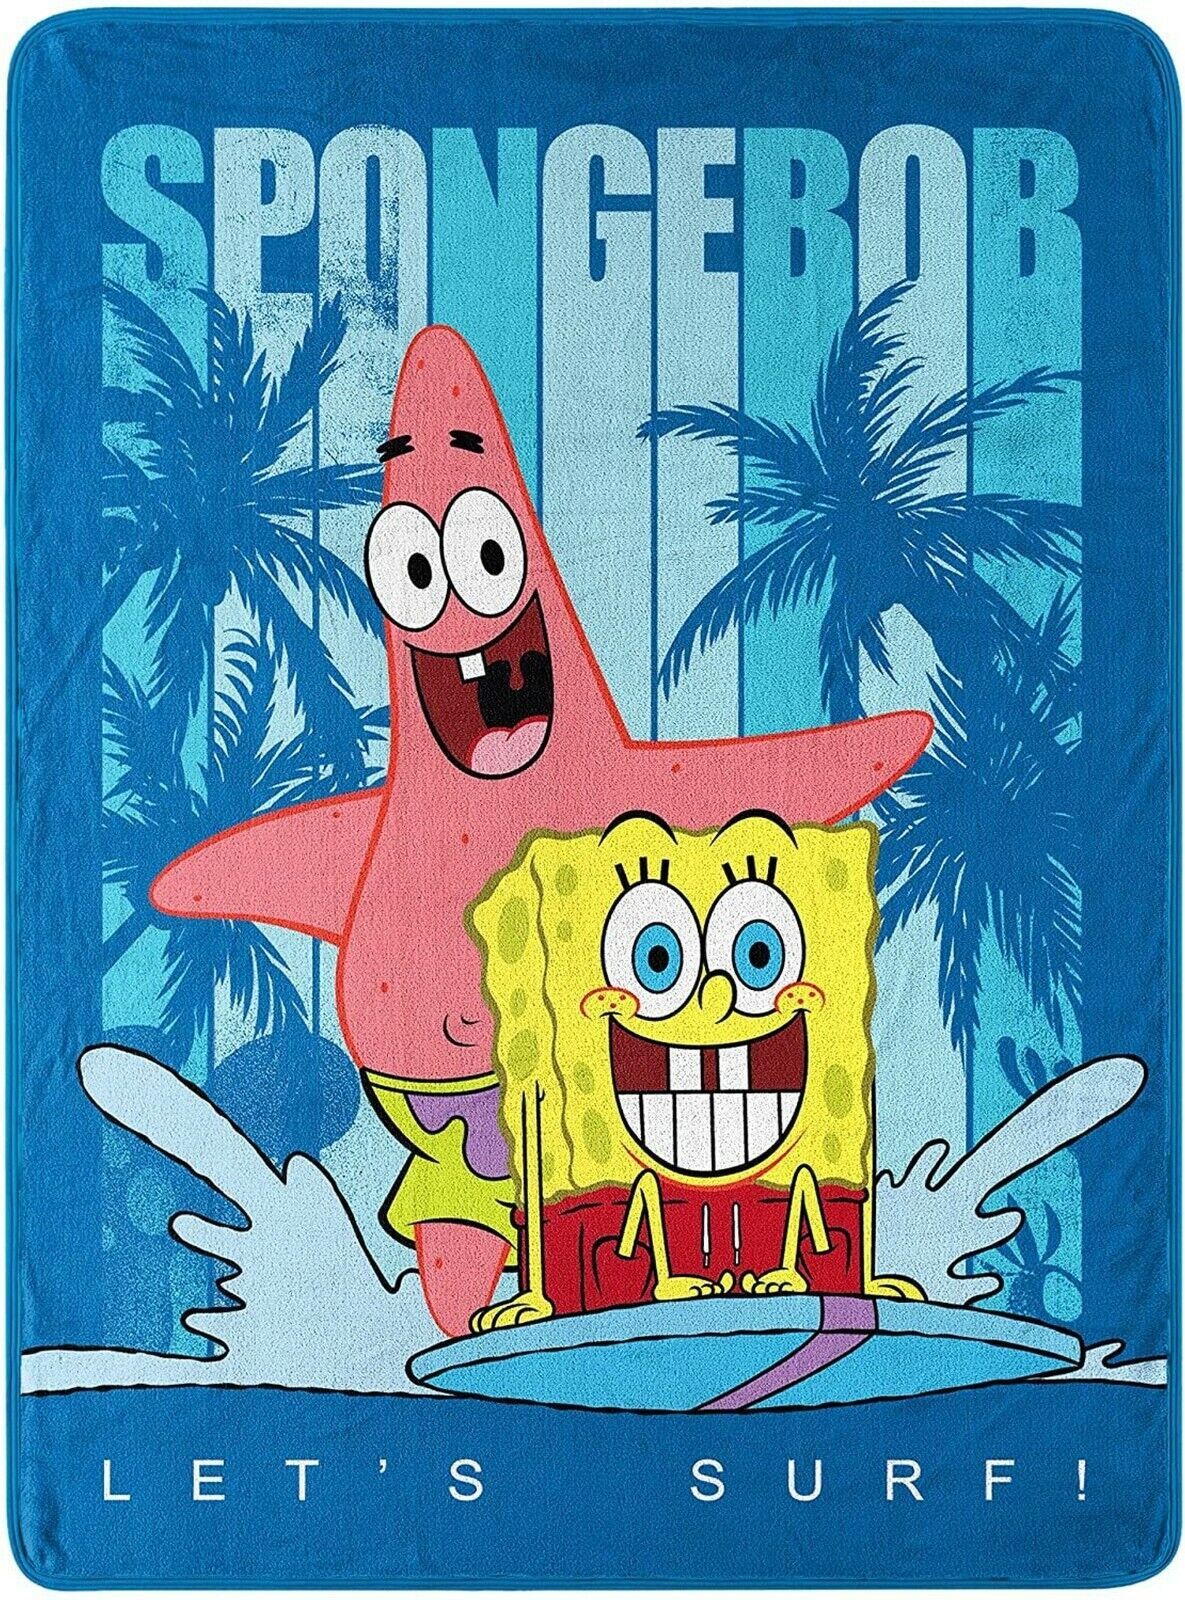 Primary image for Spongebob Squarepants Let's Surf Throw Plush Blanket measures 46 x 60 inches